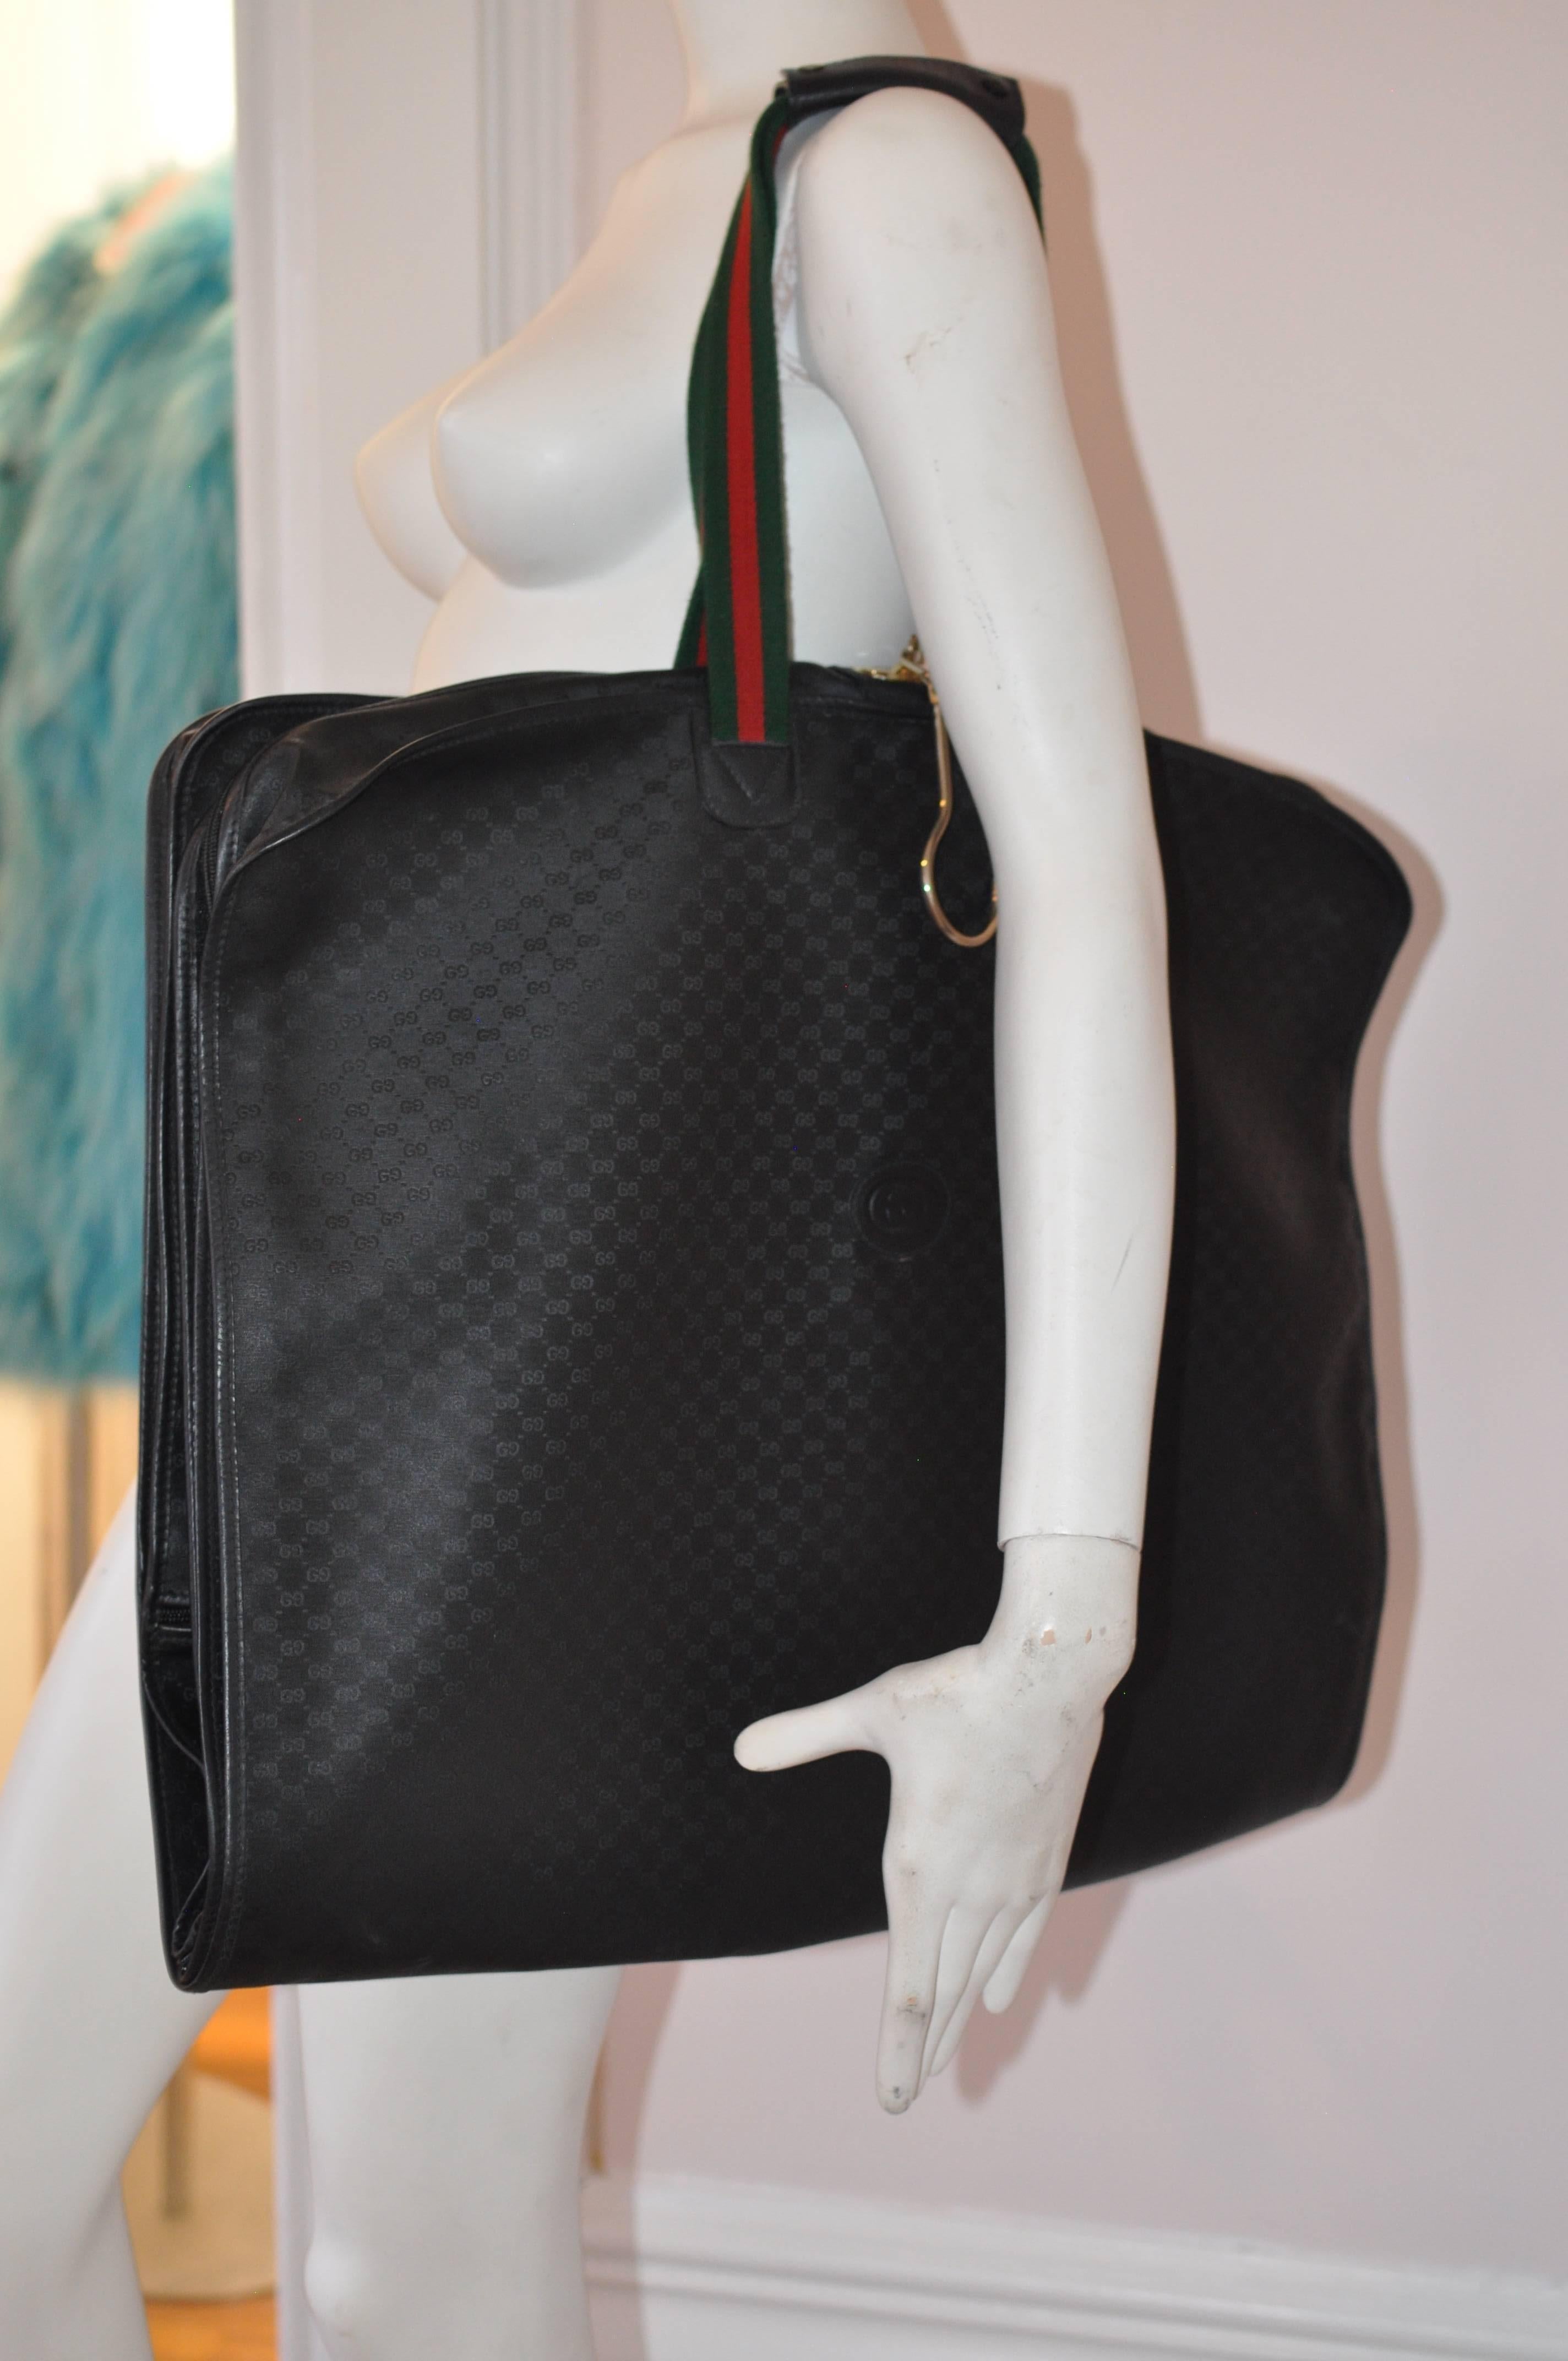 This black monogram garment bag has the red and green classic handle detail; zip around closures; front zipped compartment, and a built-in hanger system. The bag is in very good condition except for scratches on a very small area (pictured), and one